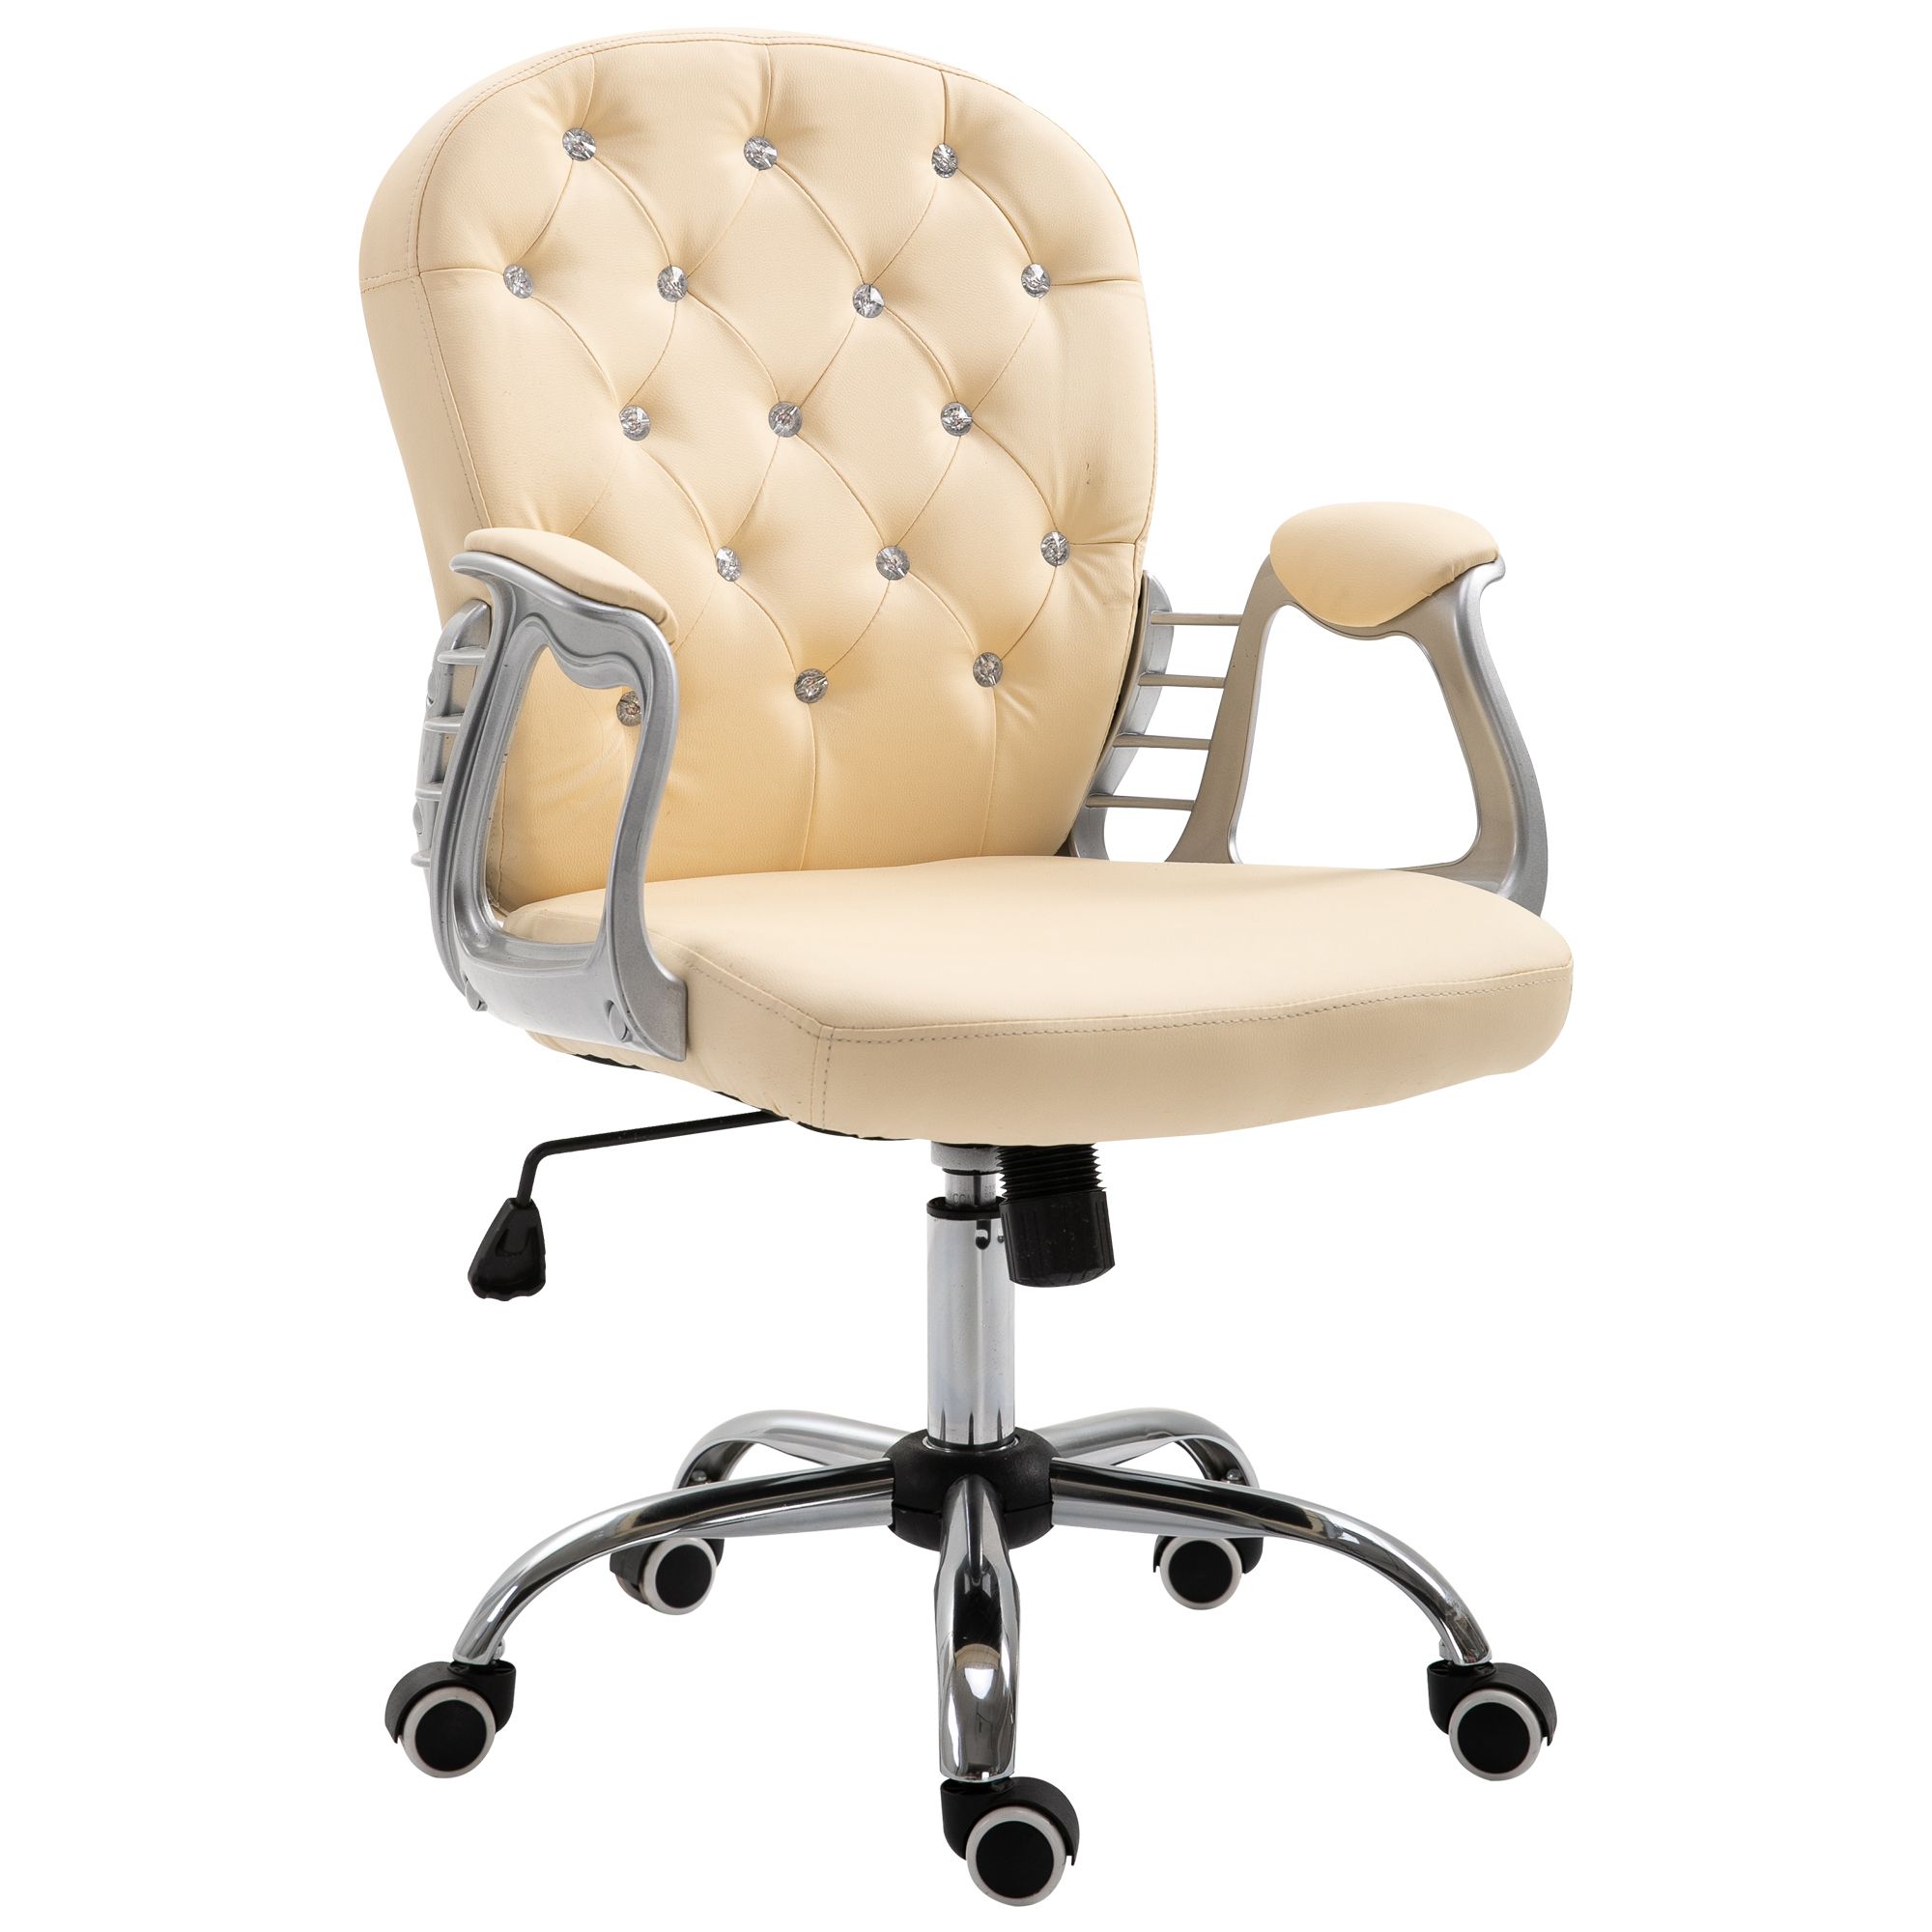 Vinsetto Vanity Middle Back Office Chair Tufted Backrest Swivel Rolling Regarding Fabric Outdoor Middle Chair Sets (View 13 of 15)